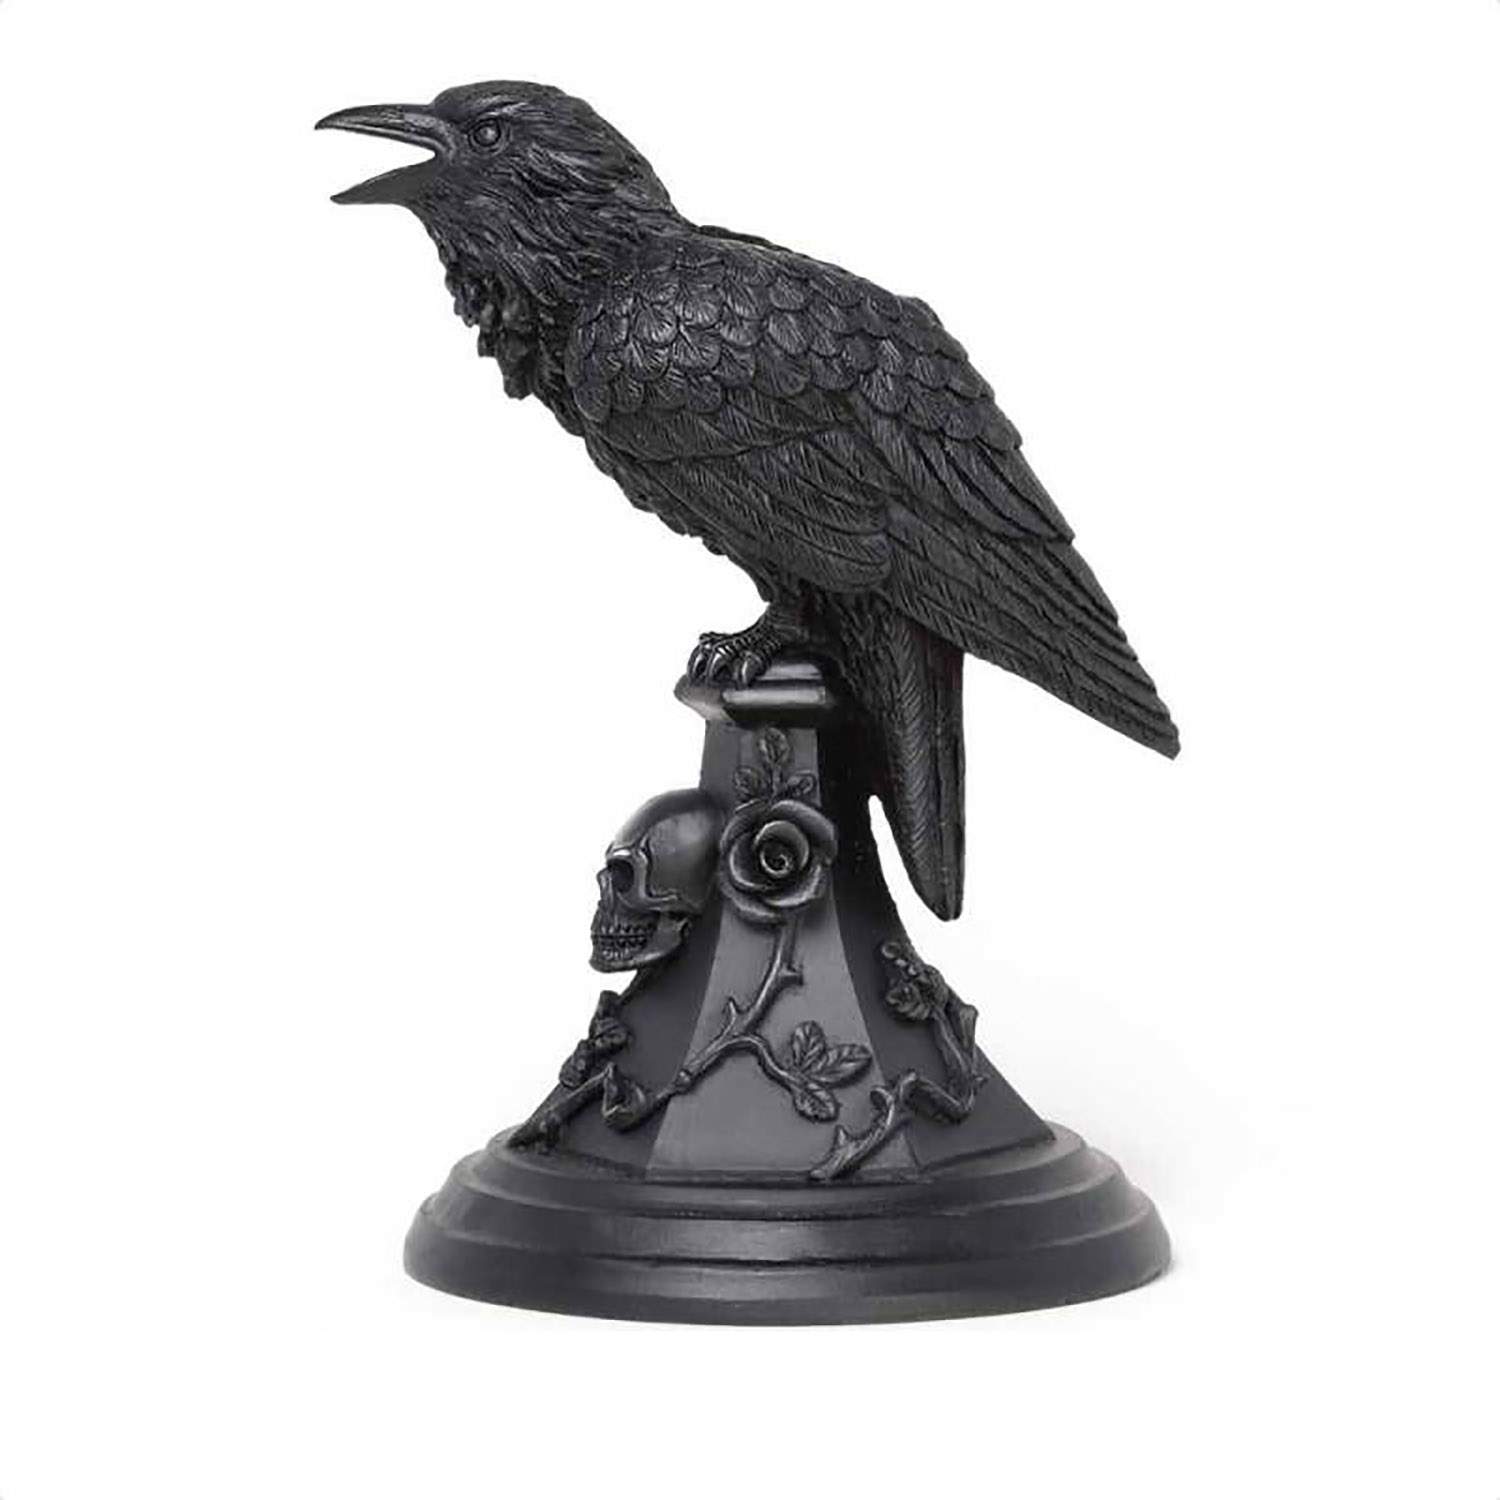 15045 Poe's Raven Candle Holder